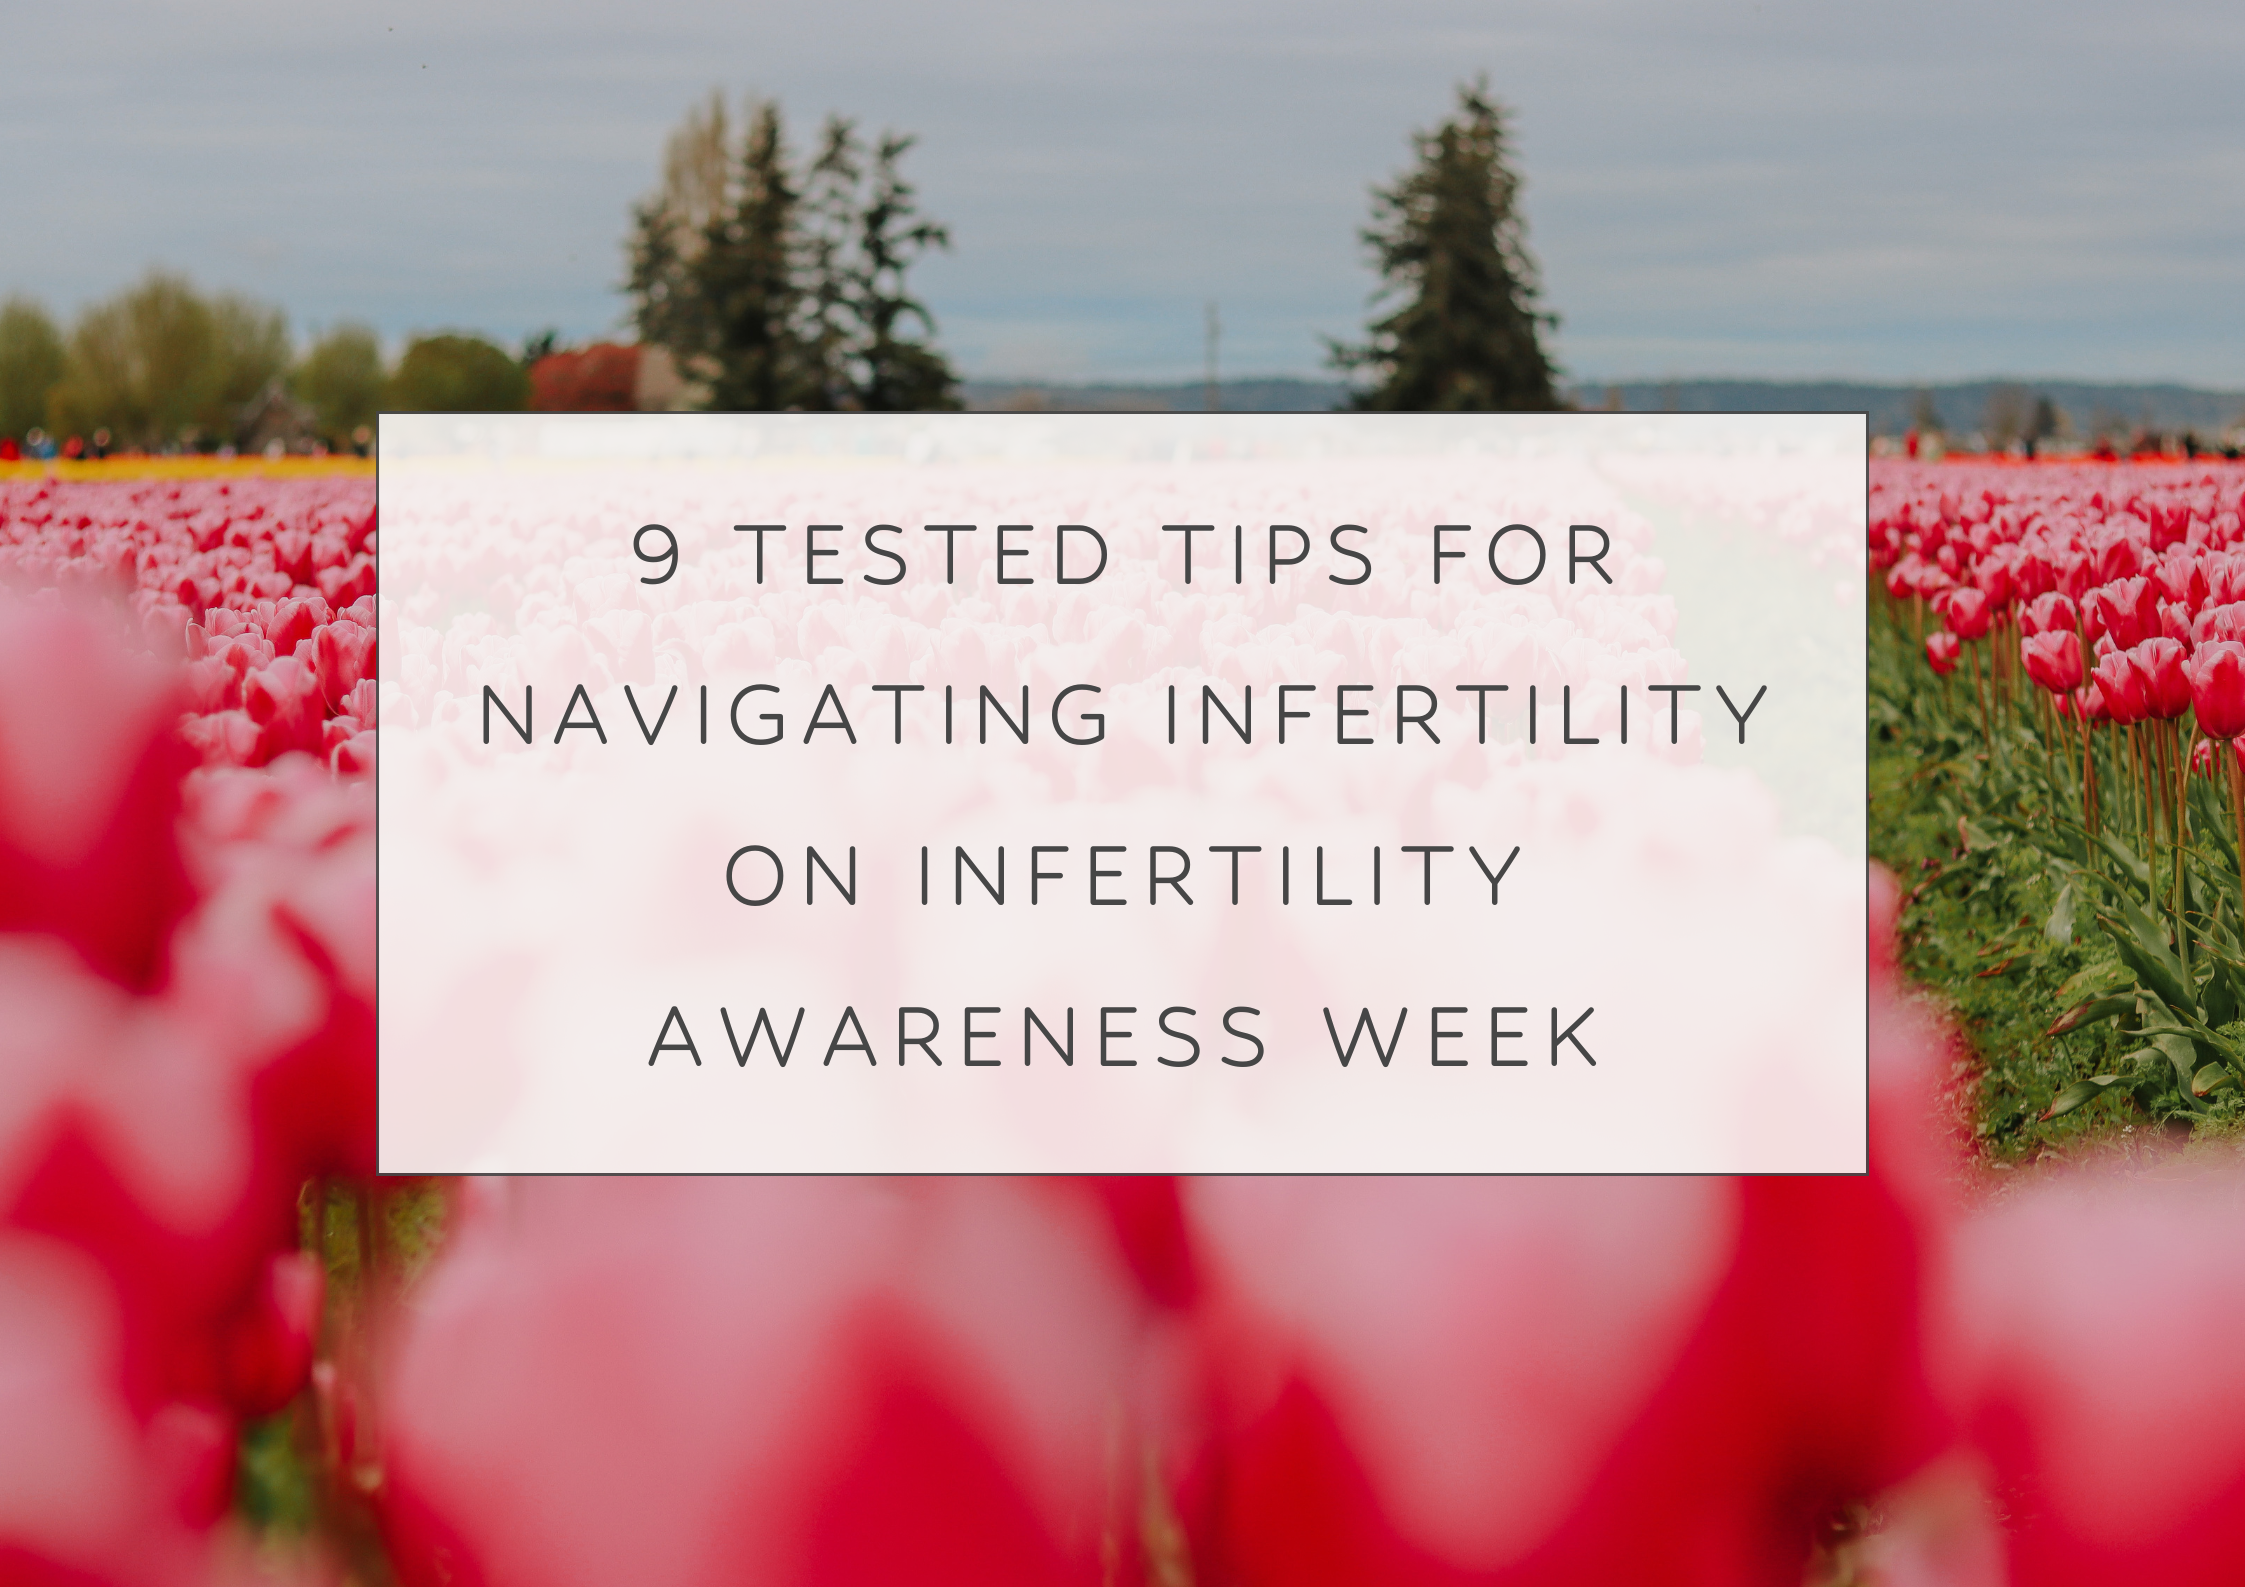 9 Tested Tips for Navigating Infertility on Infertility Awareness Week